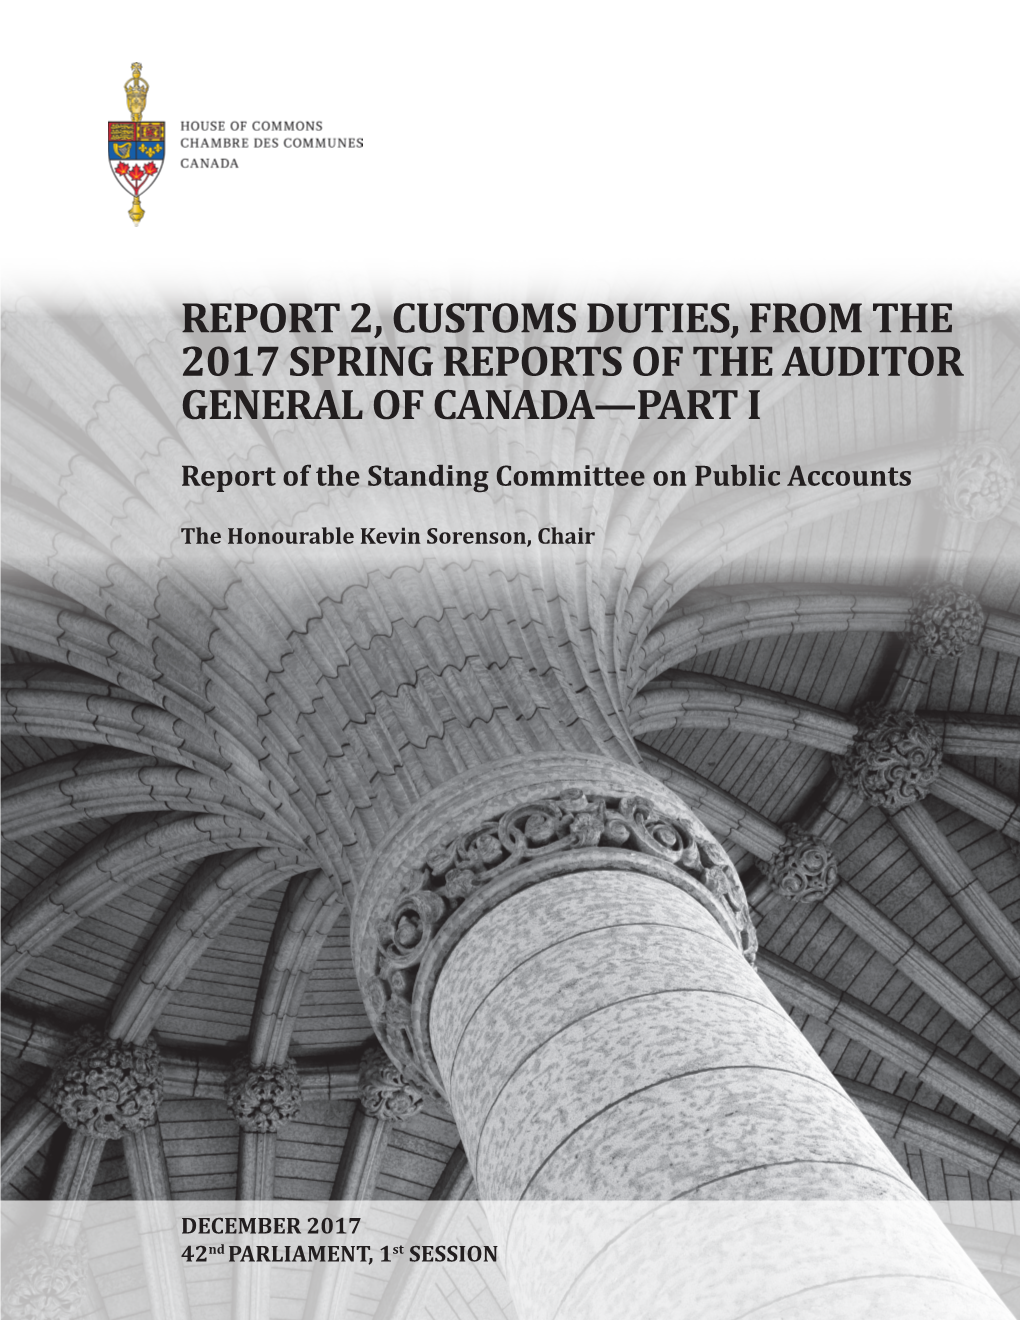 Report 2, Custom Duties, from the Spring 2017 Reports of the Auditor General of Canada